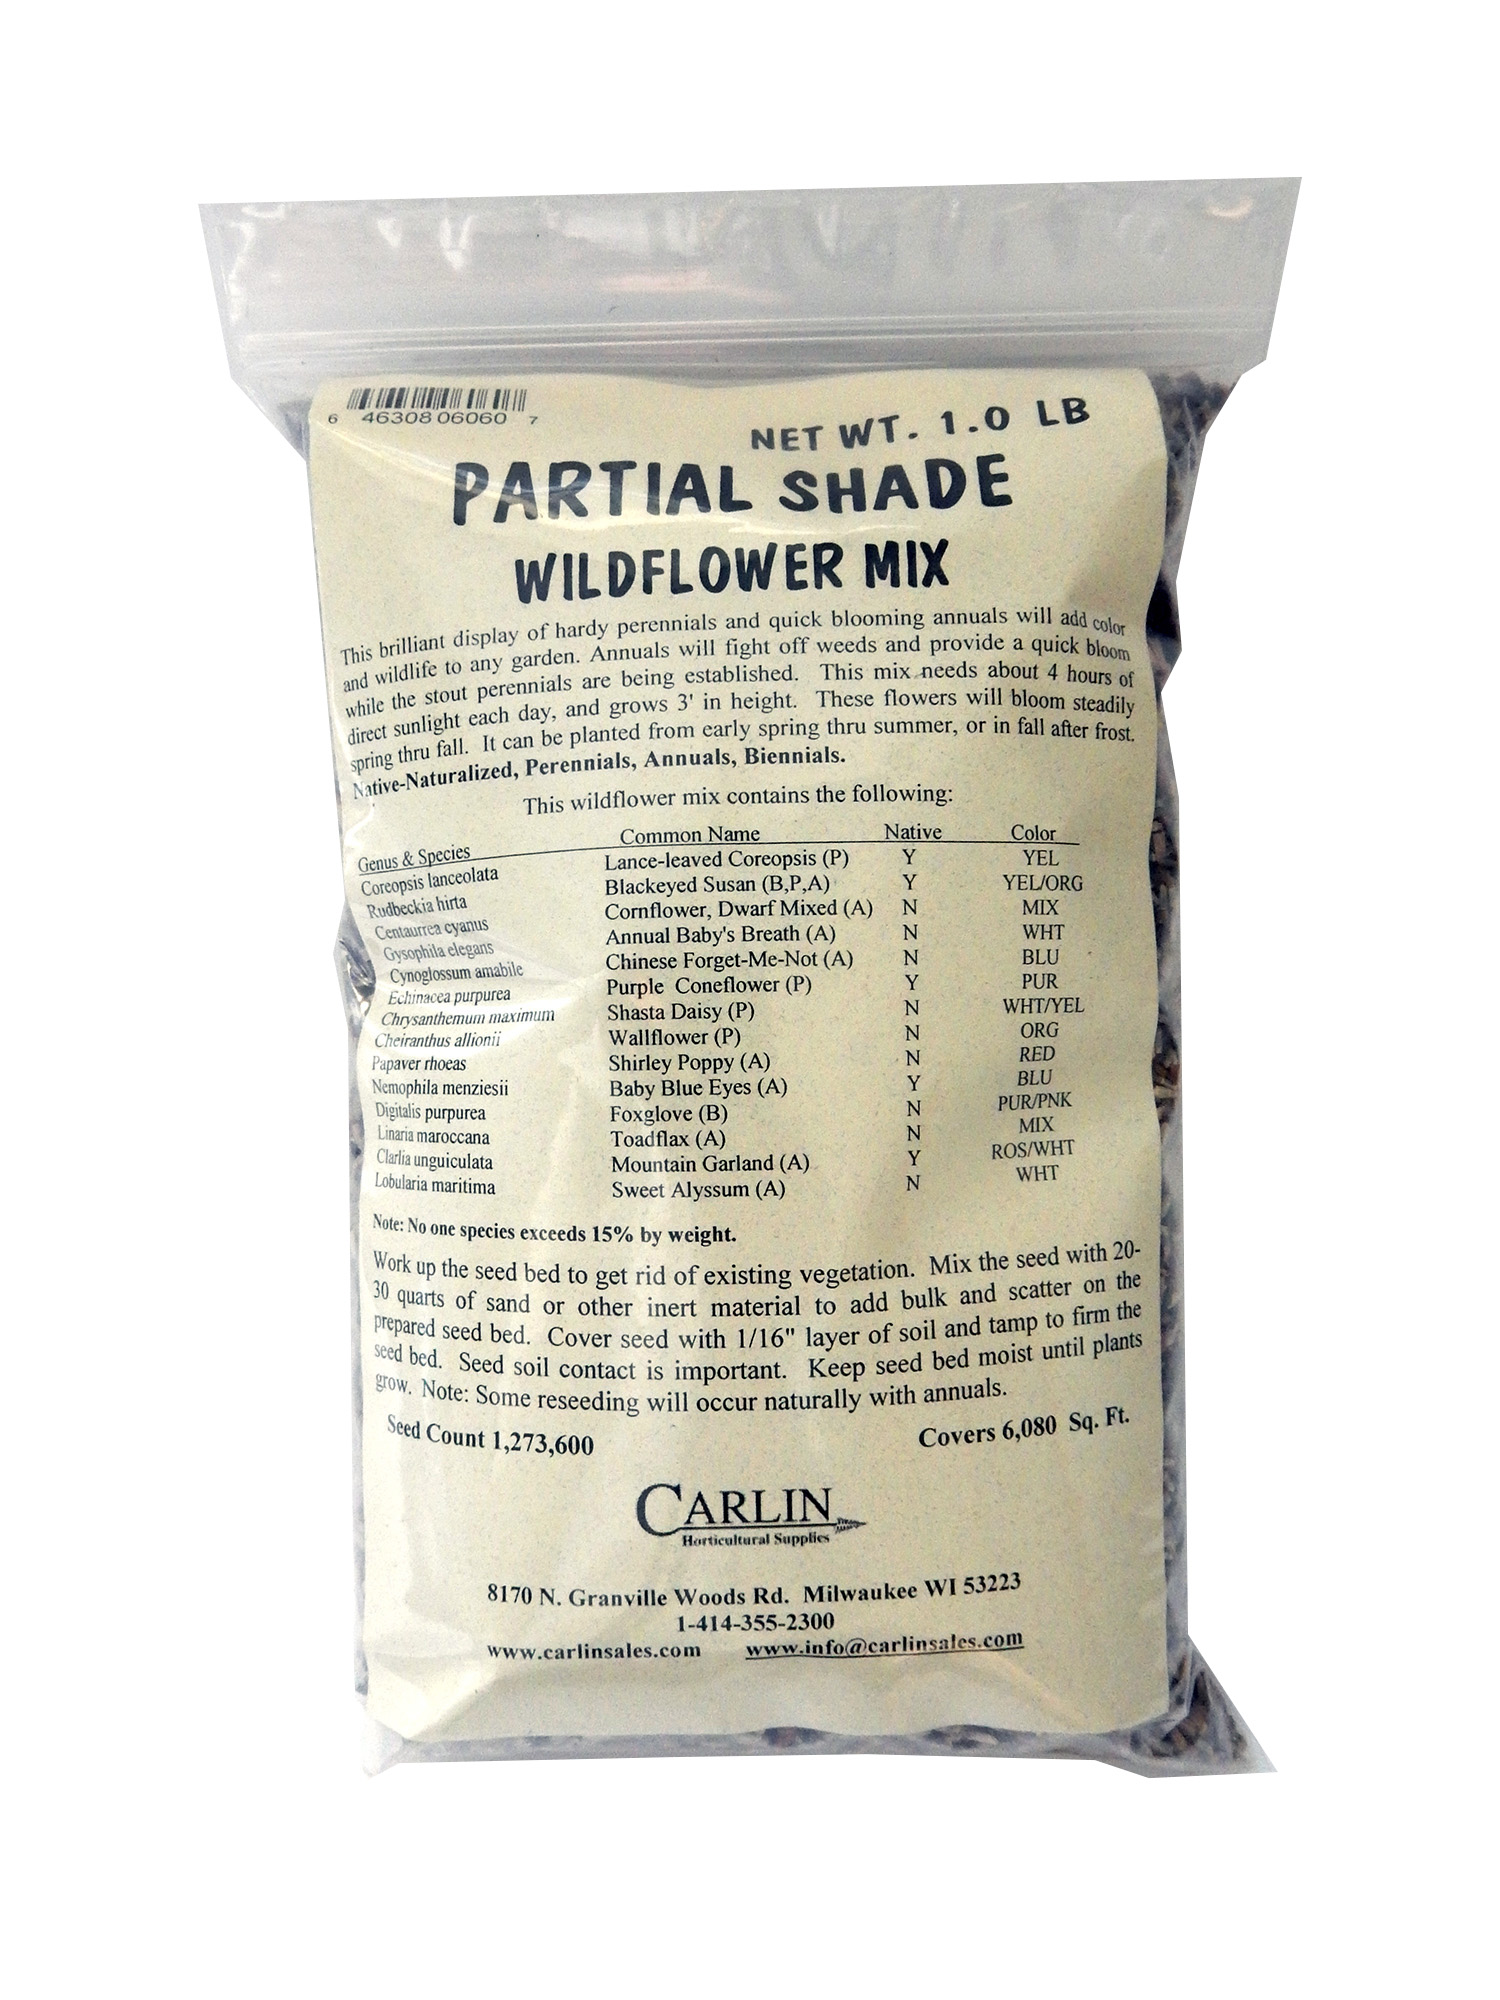 Partial Shade Wildflower Mix 1 lb - Wildflower Seed